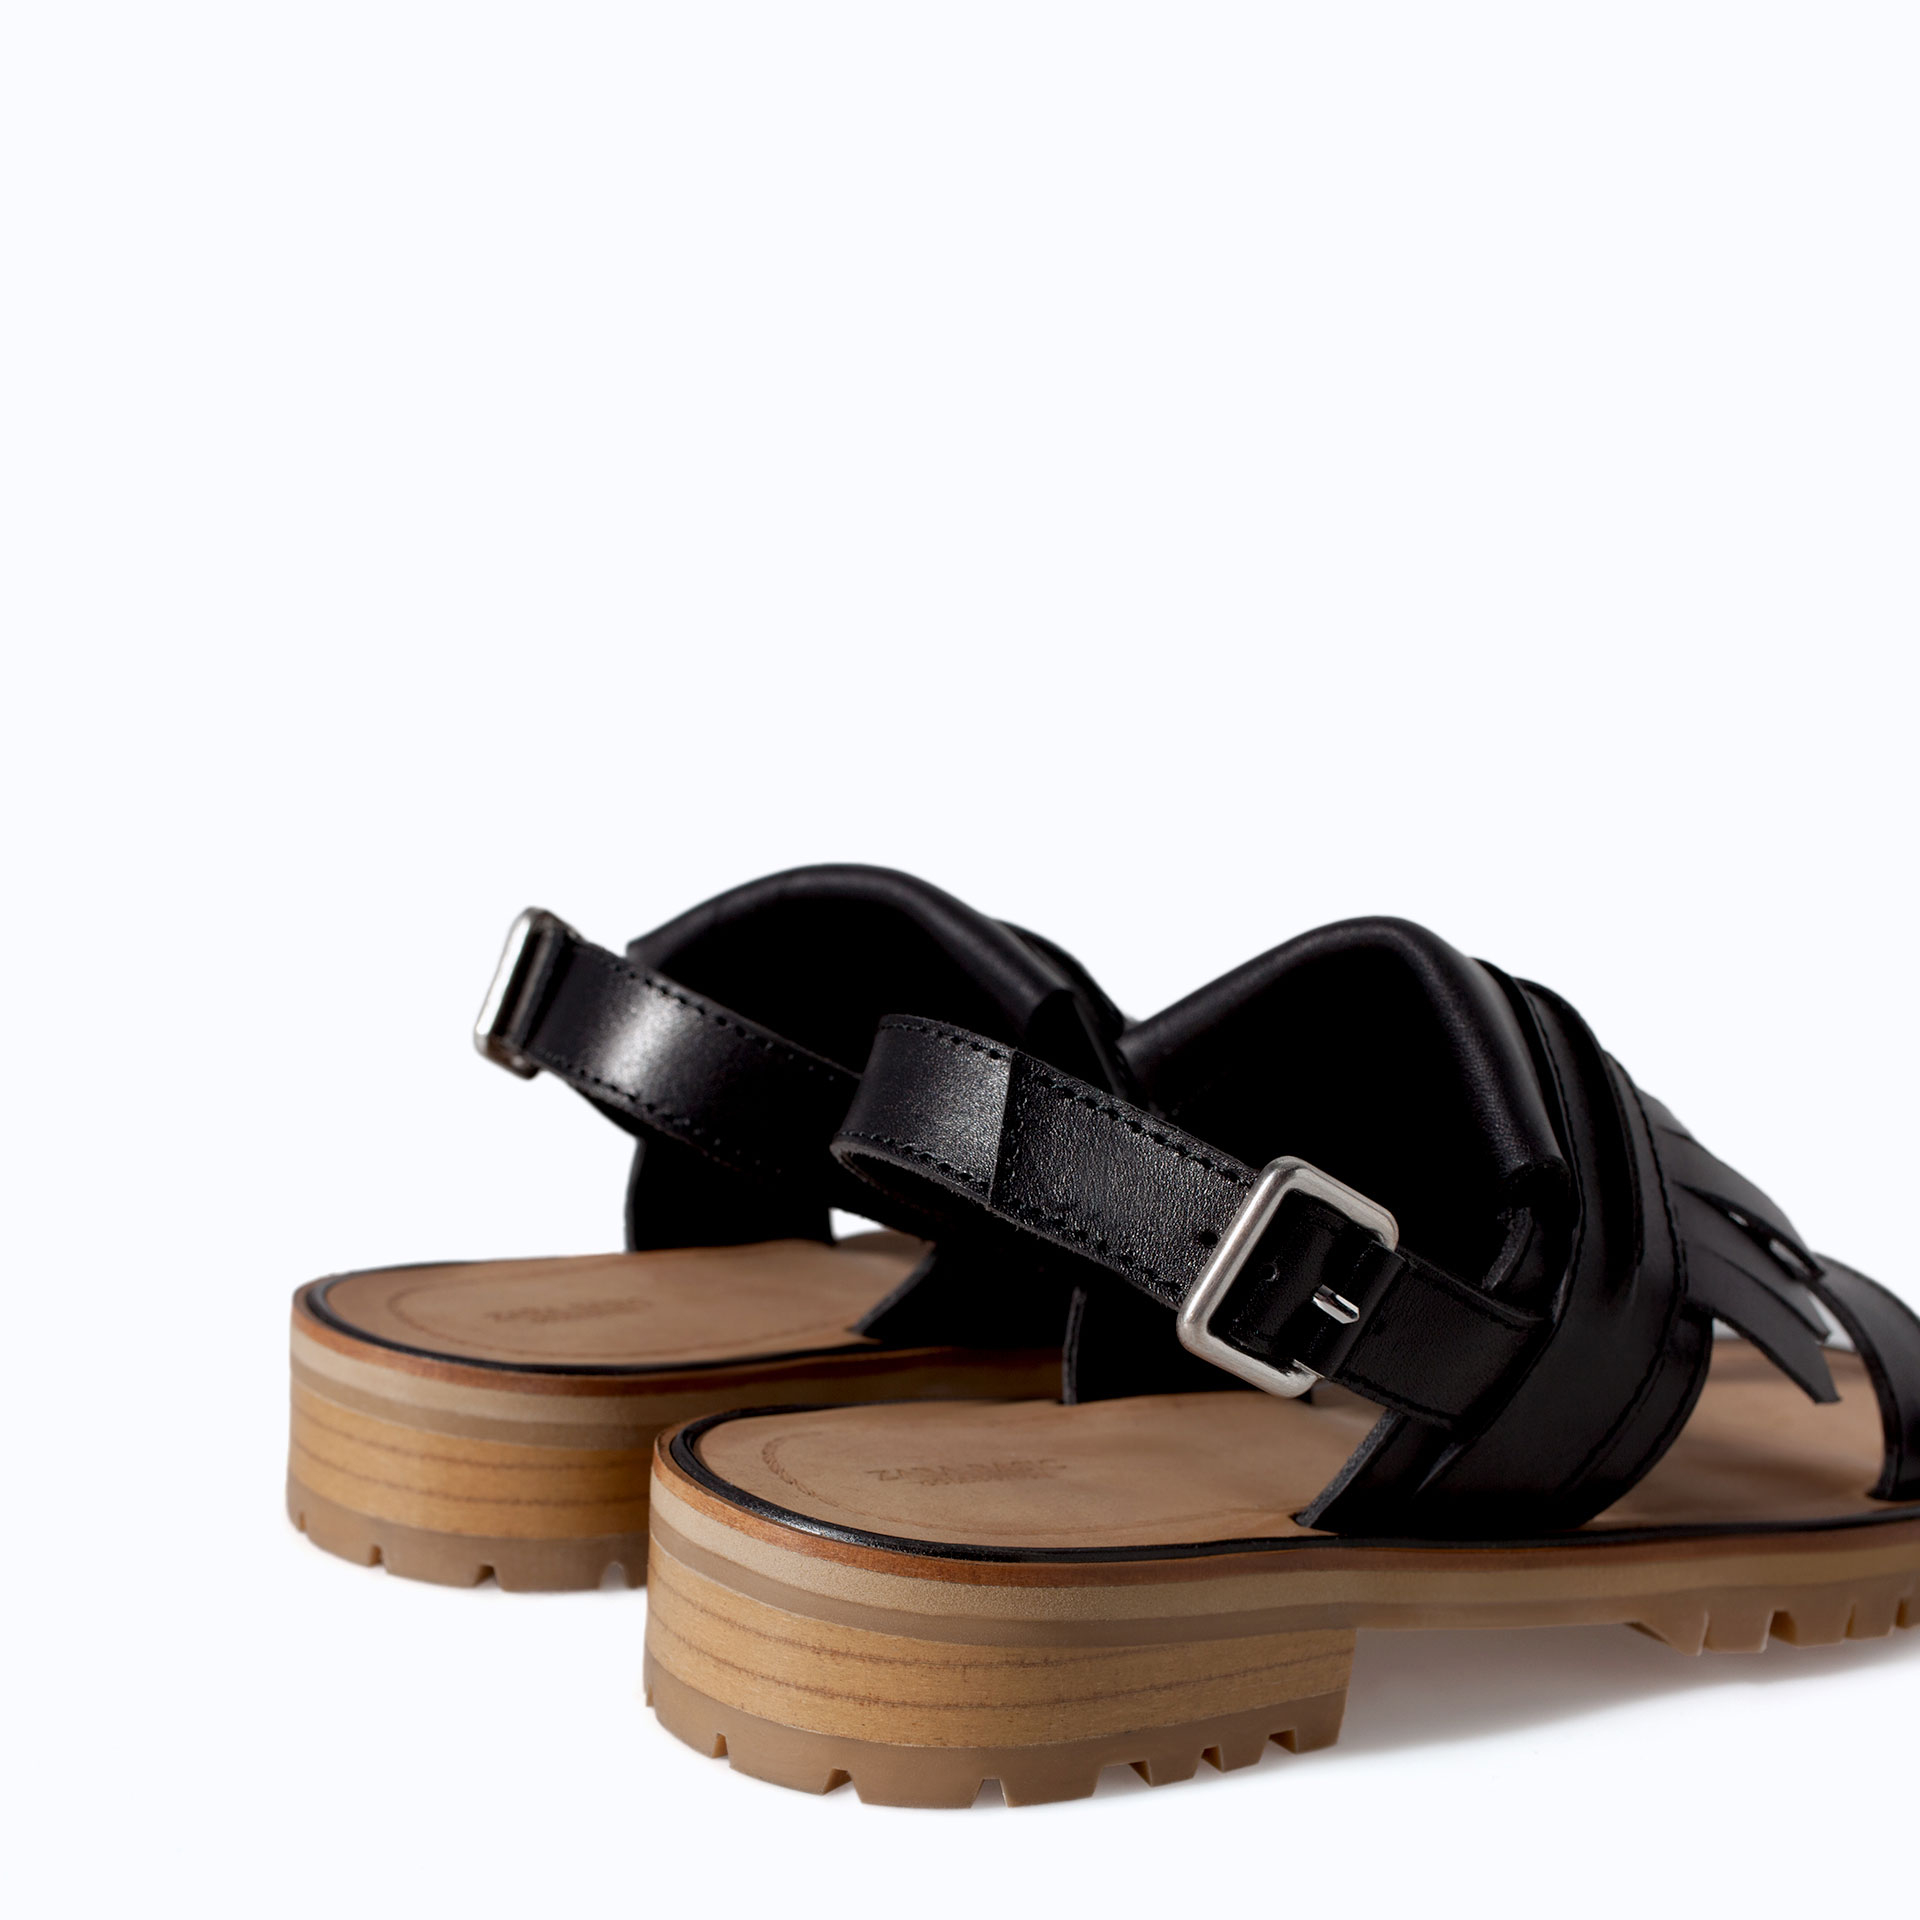 Zara Leather Sandals with Fringes in Black | Lyst